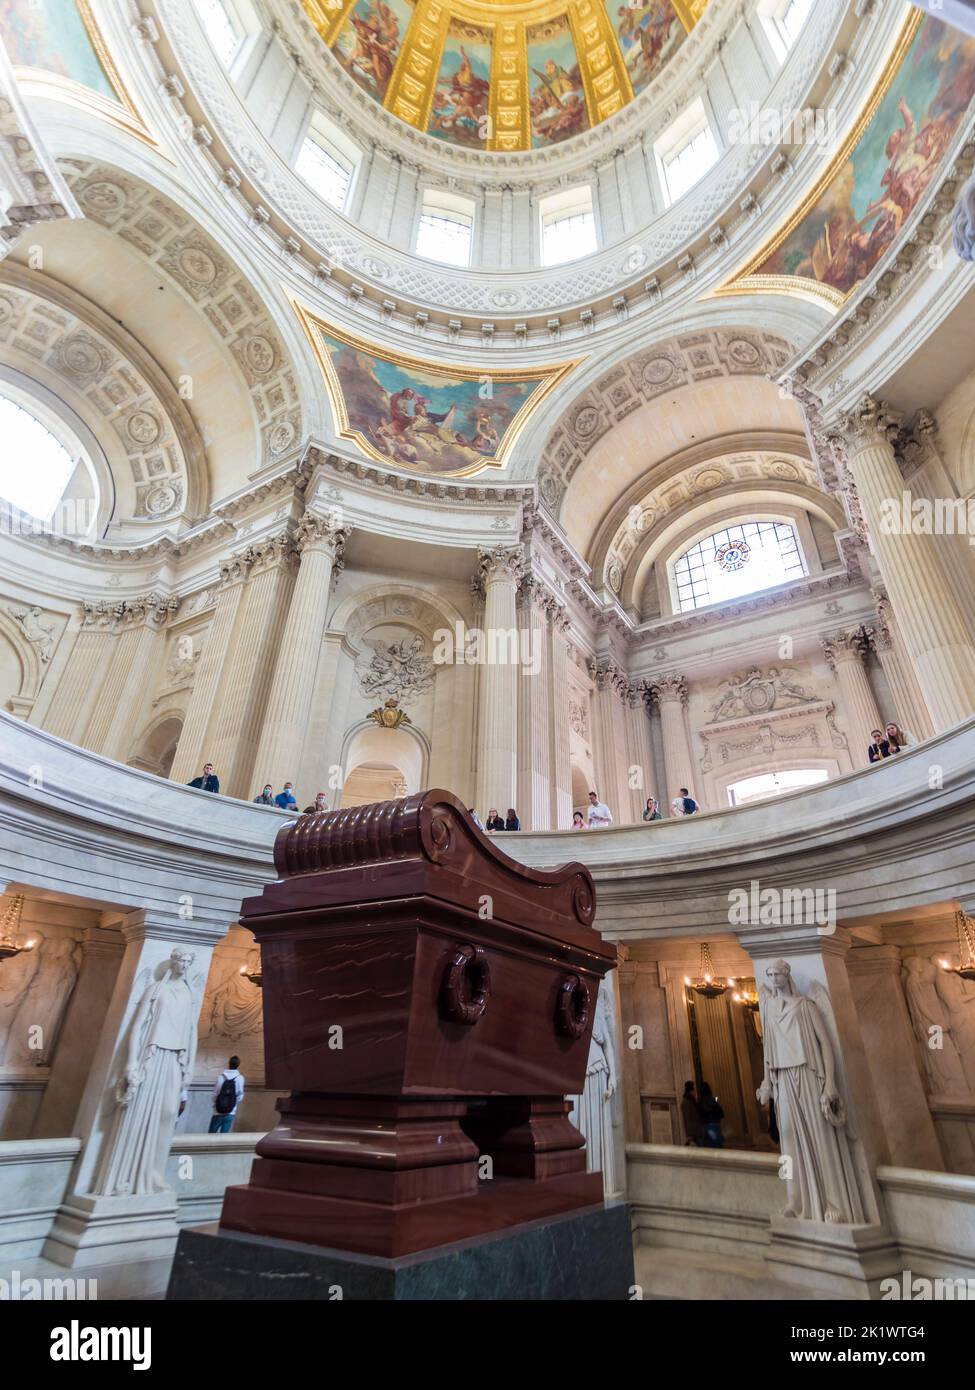 Napoleon's tomb inside the Hotel Des Invalides in Paris, France Stock Photo